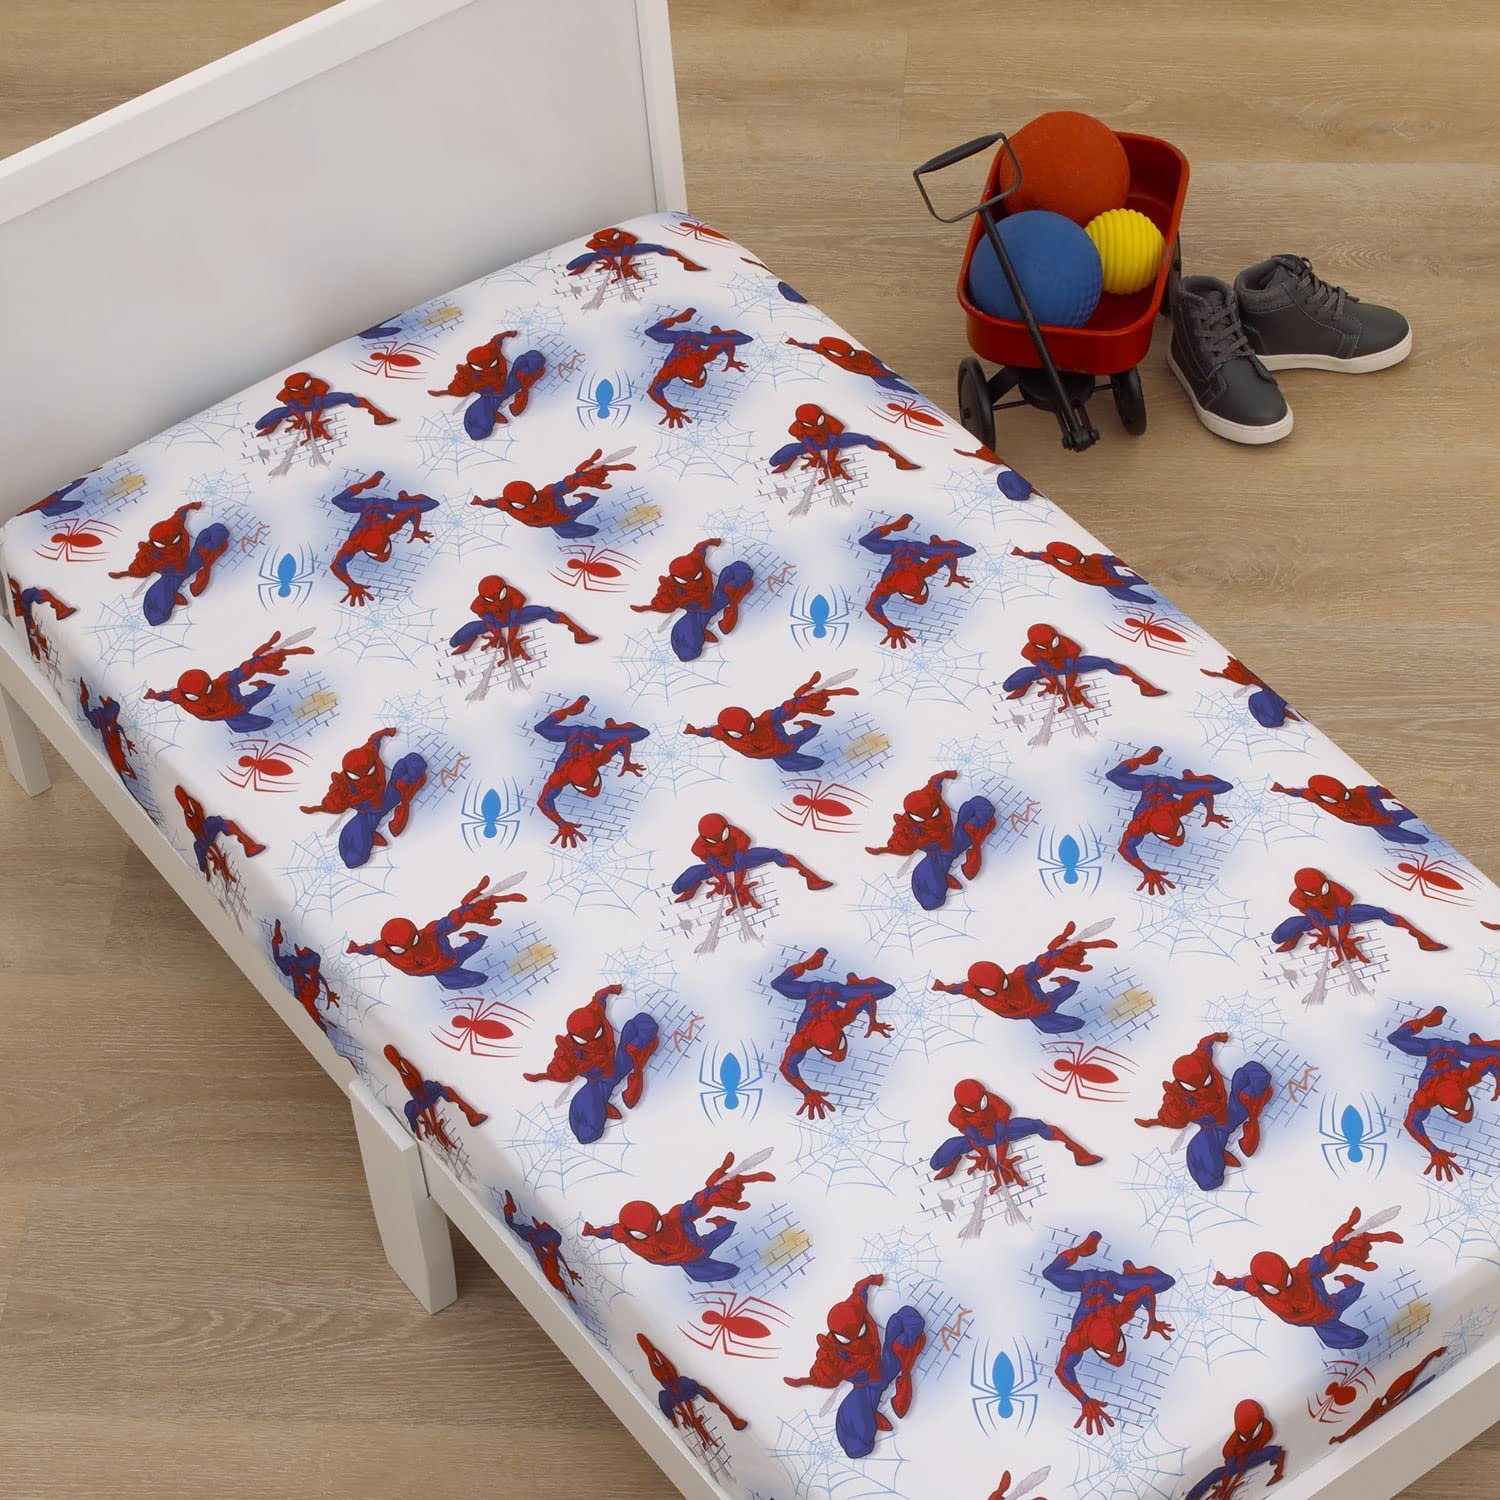 Marvel Spiderman Fitted Crib Sheet 100% Soft Microfiber, Baby Sheet, Fits Standard Size Crib Mattress 28in x 52in - image 2 of 4